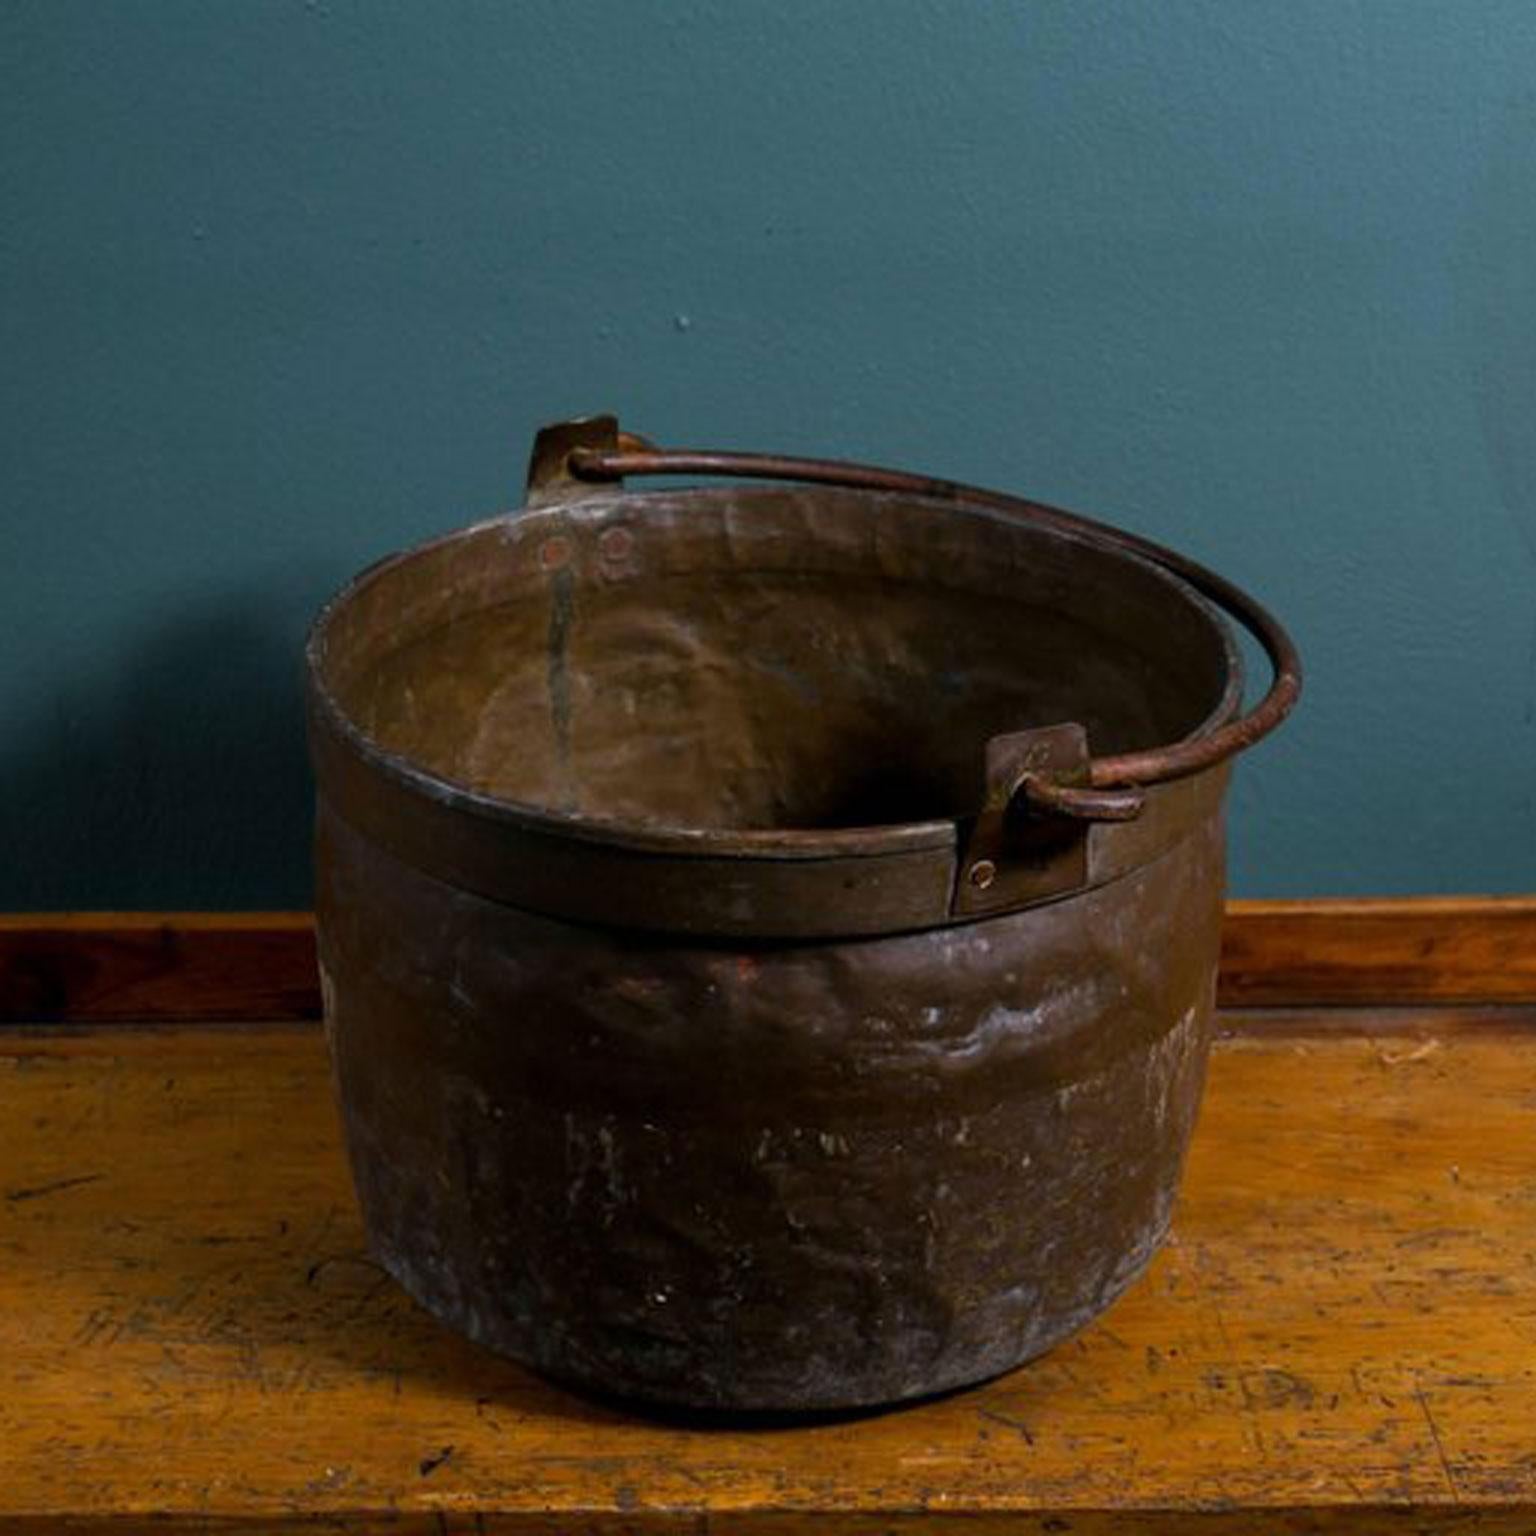 Antique French copper pot or bucket with iron handle, circa 1890. All hand forged with beautiful patina. Multiple pots available - all similar in size but each one-of-a-kind. Makes an attractive decorative accessory or container for firewood,